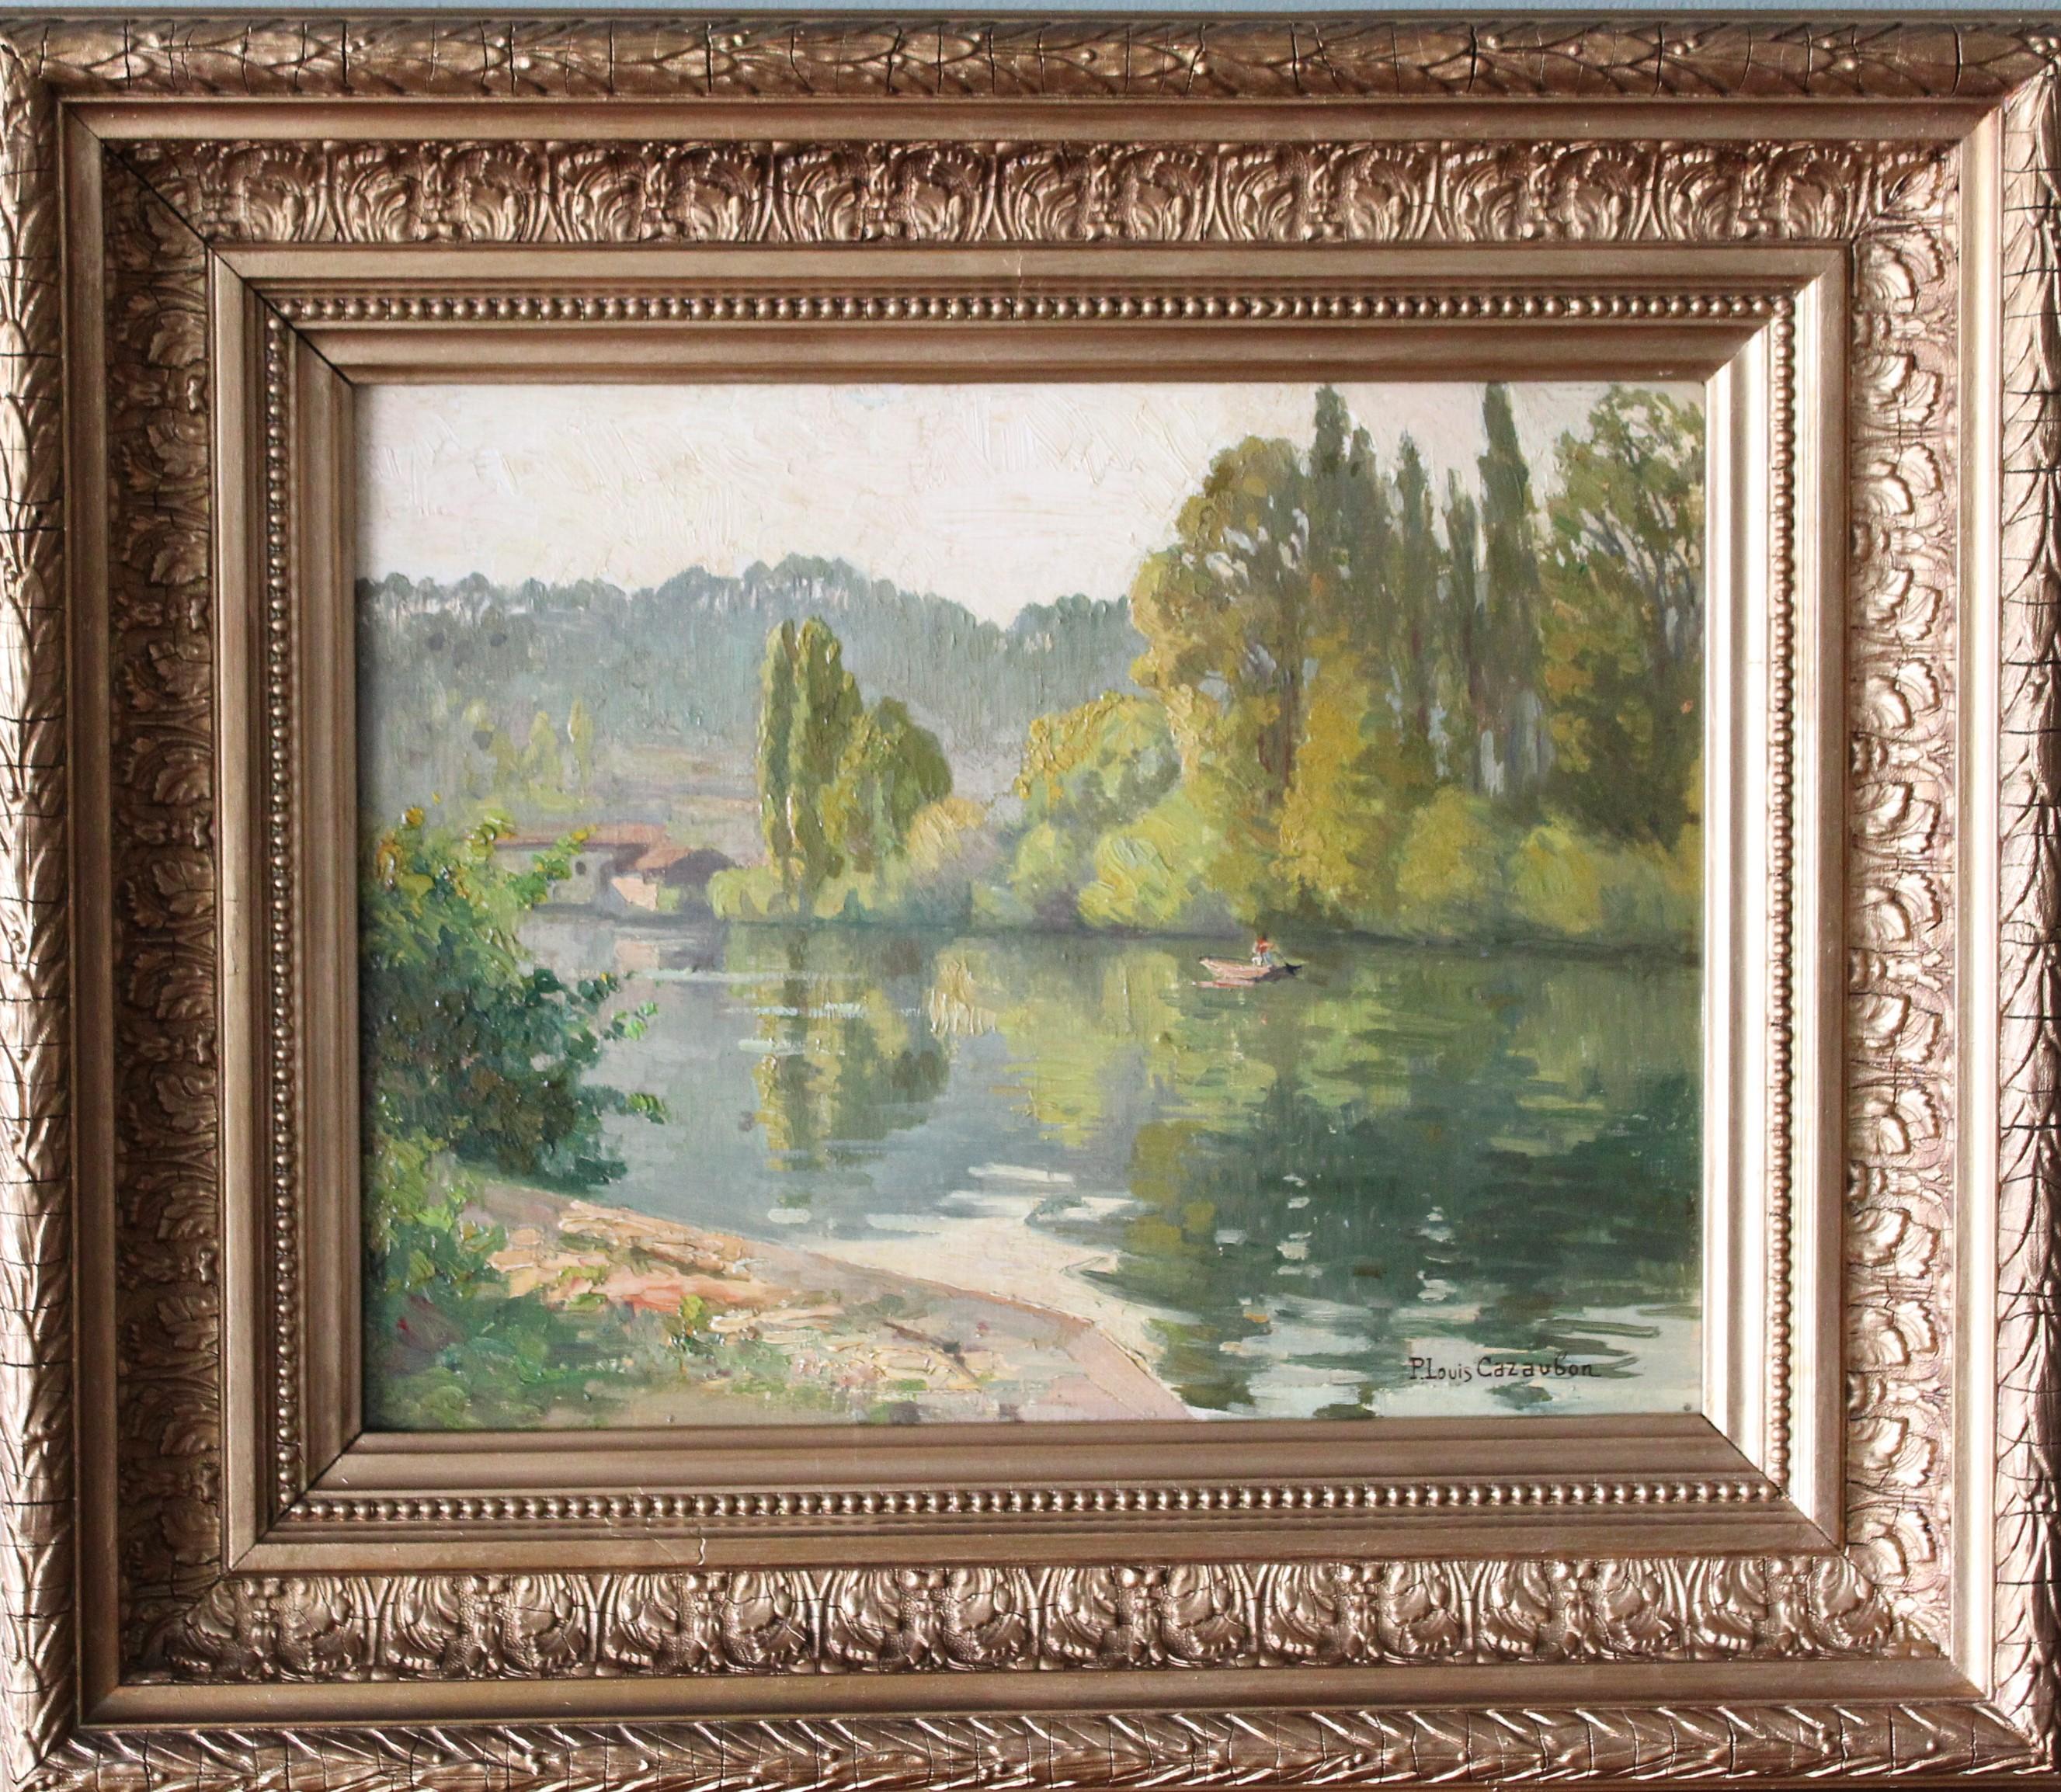 Antique French riverscape/landscape in a beautiful ornate frame by French artist, Pierre Louis Cazaubon, signed in the lower right corner.  This attractive post-impressionist oil on thick card  of a boat making its way down the Dordogne river at the